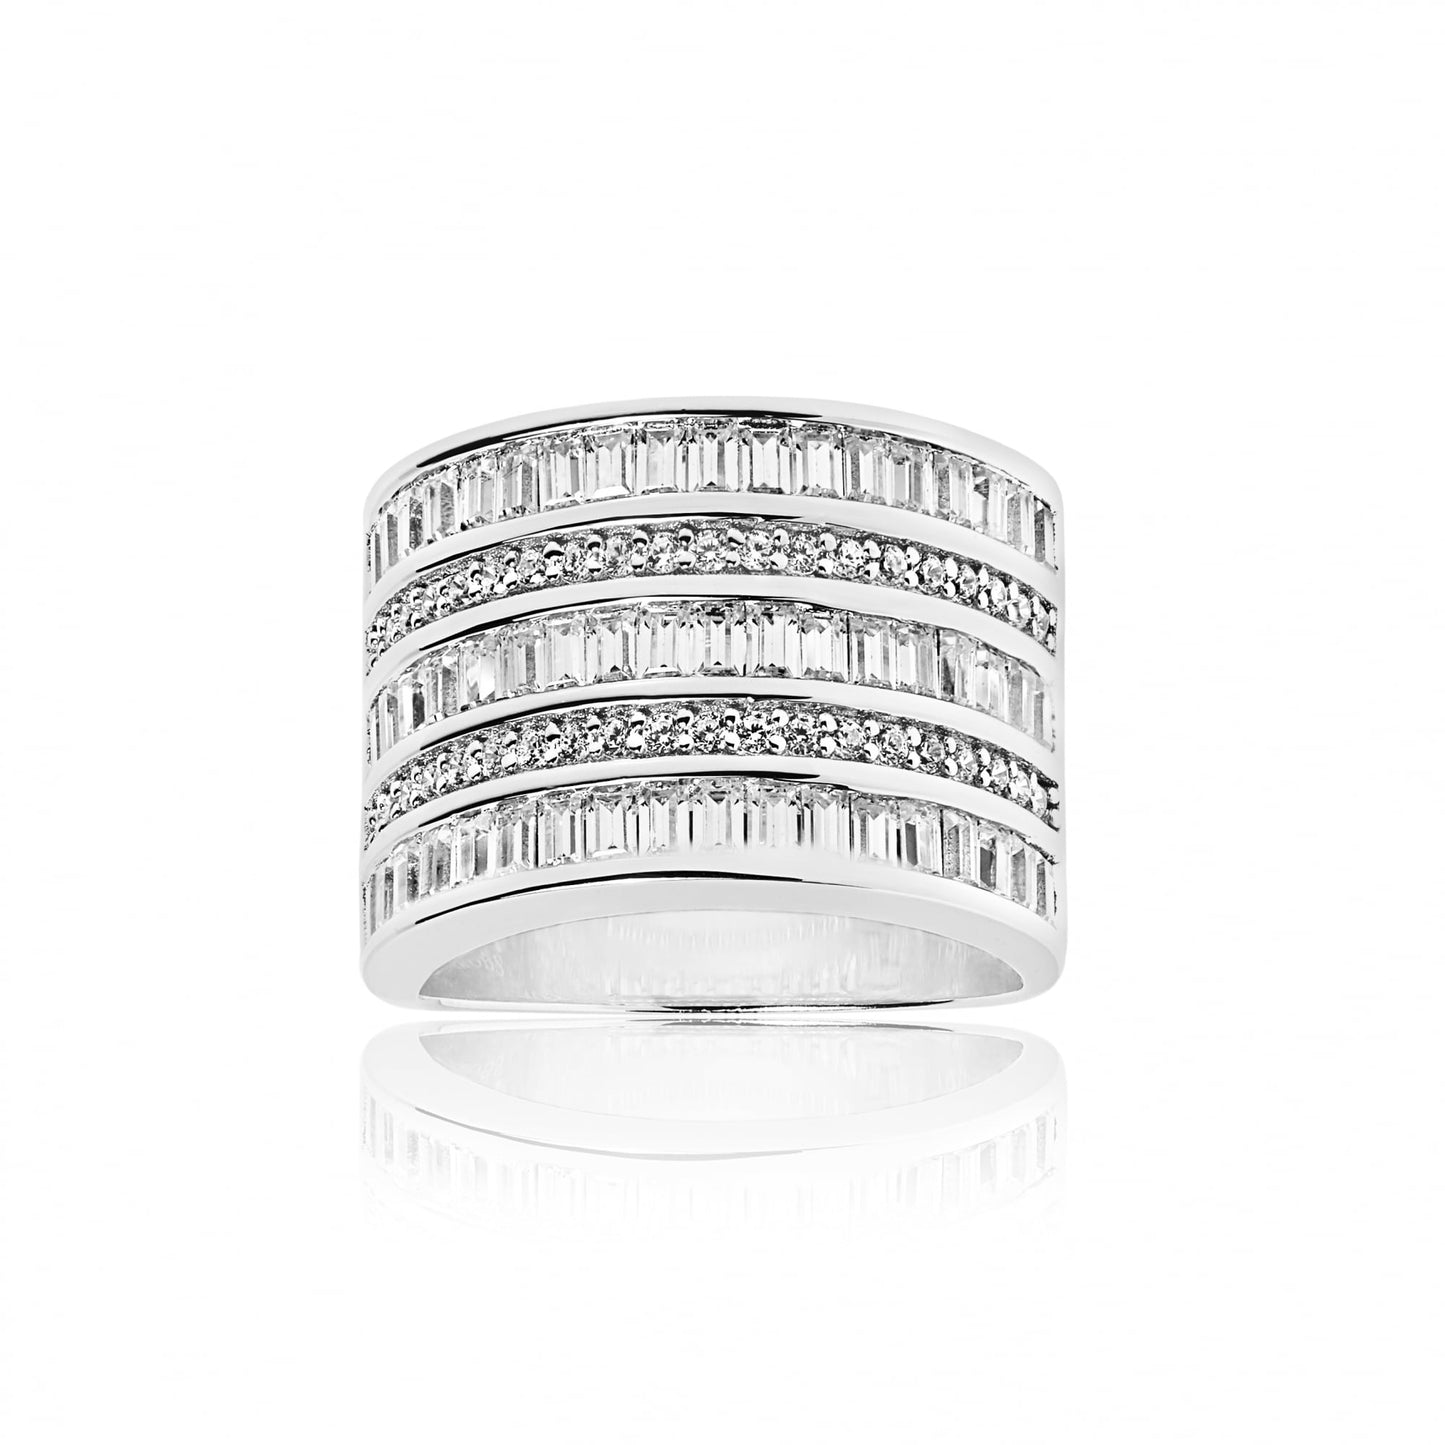 Sif Jakobs Corte Grande Ring - Sterling Silver with White Zirconia - Size N